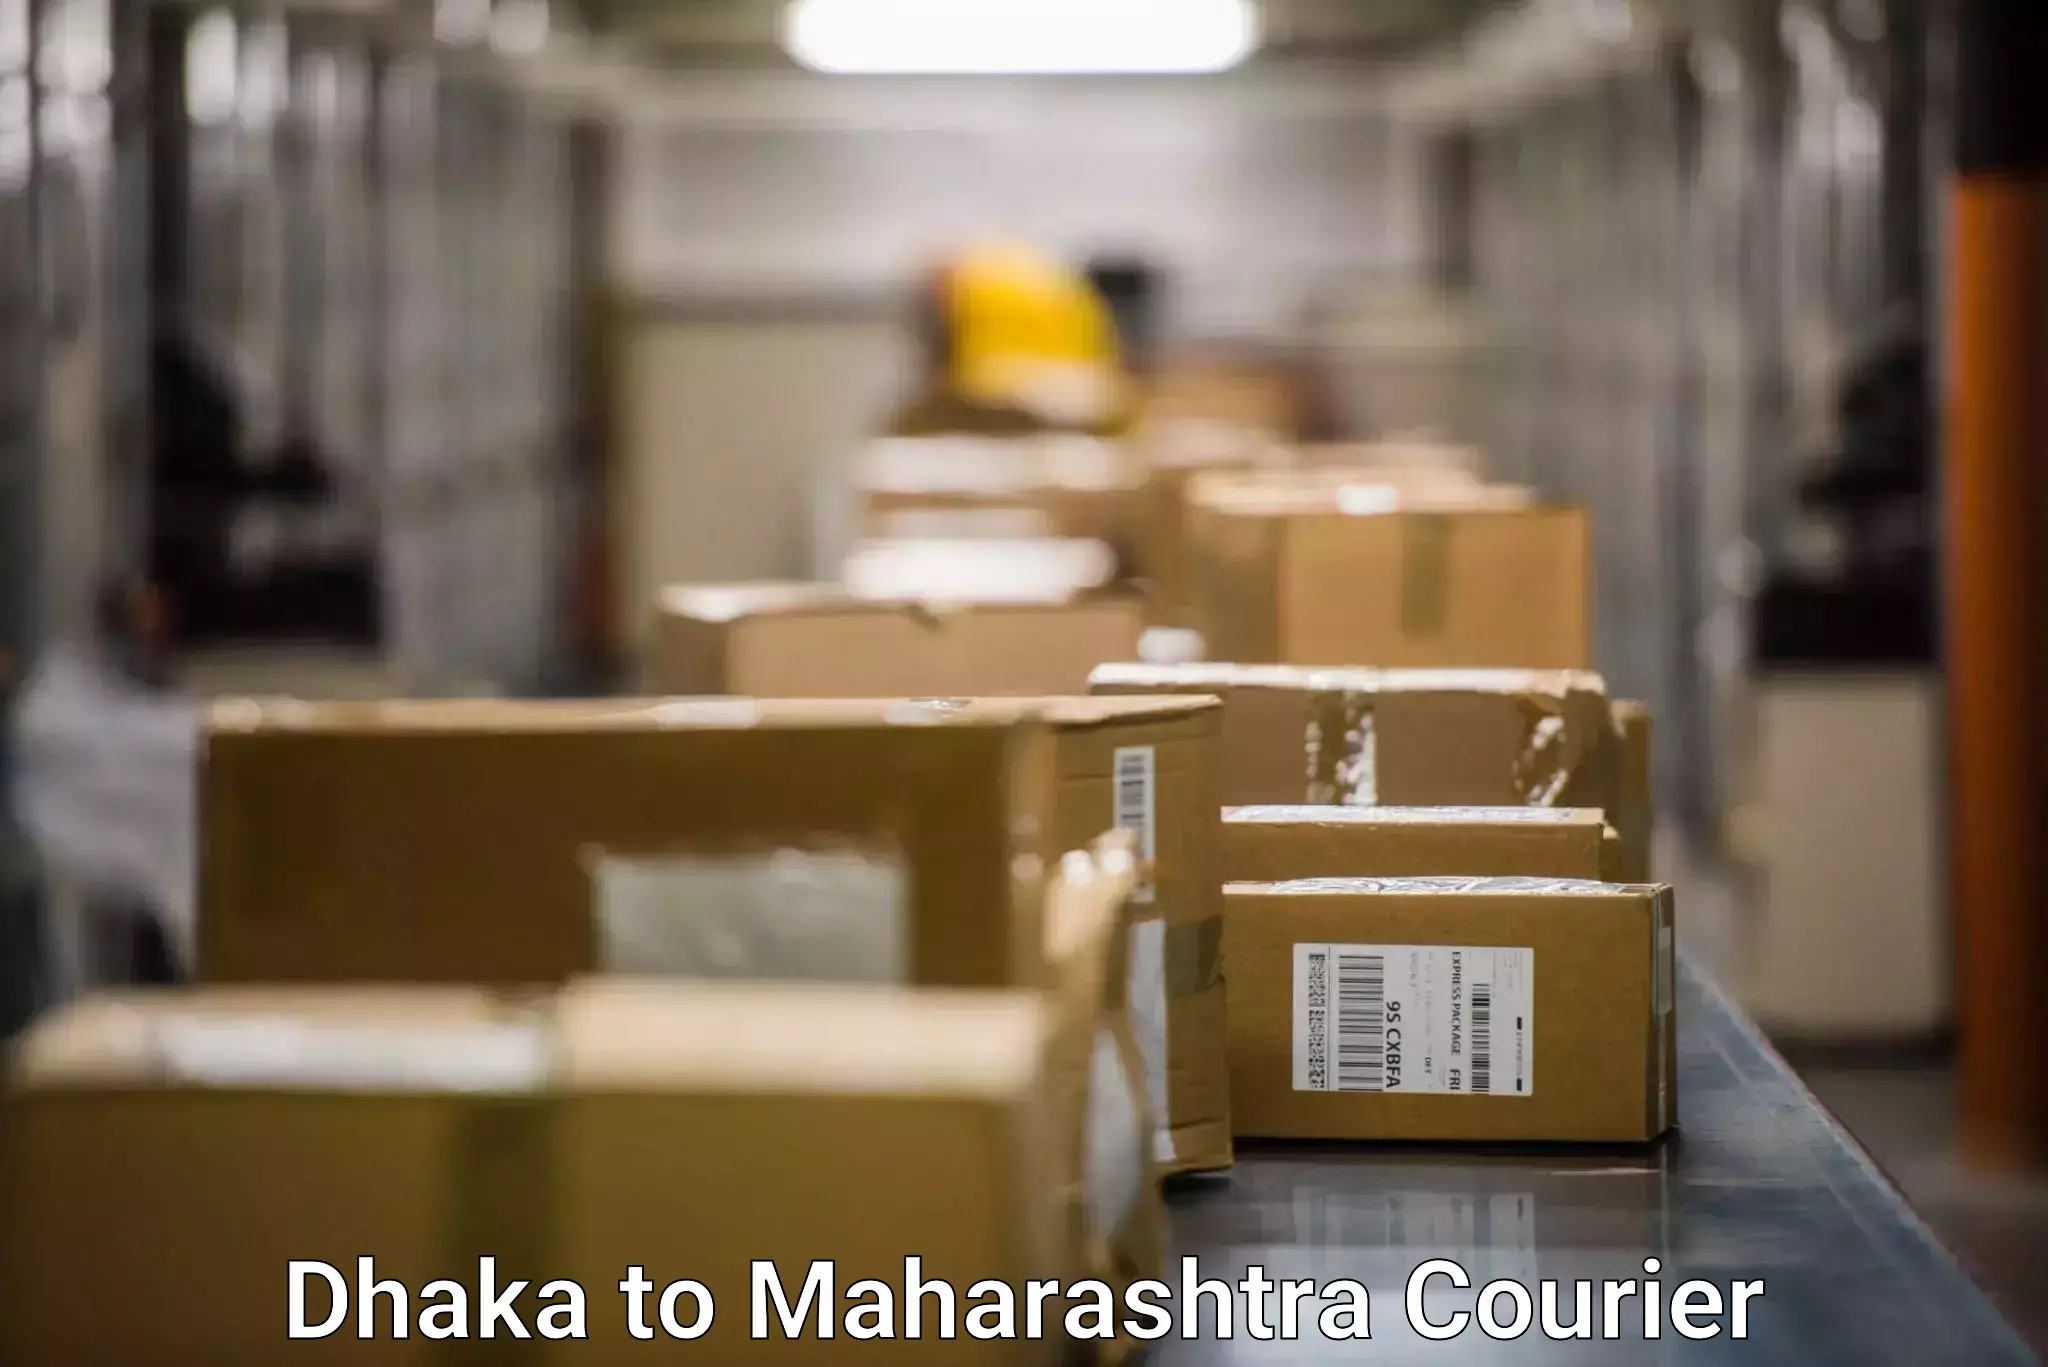 State-of-the-art courier technology Dhaka to Chinchbunder